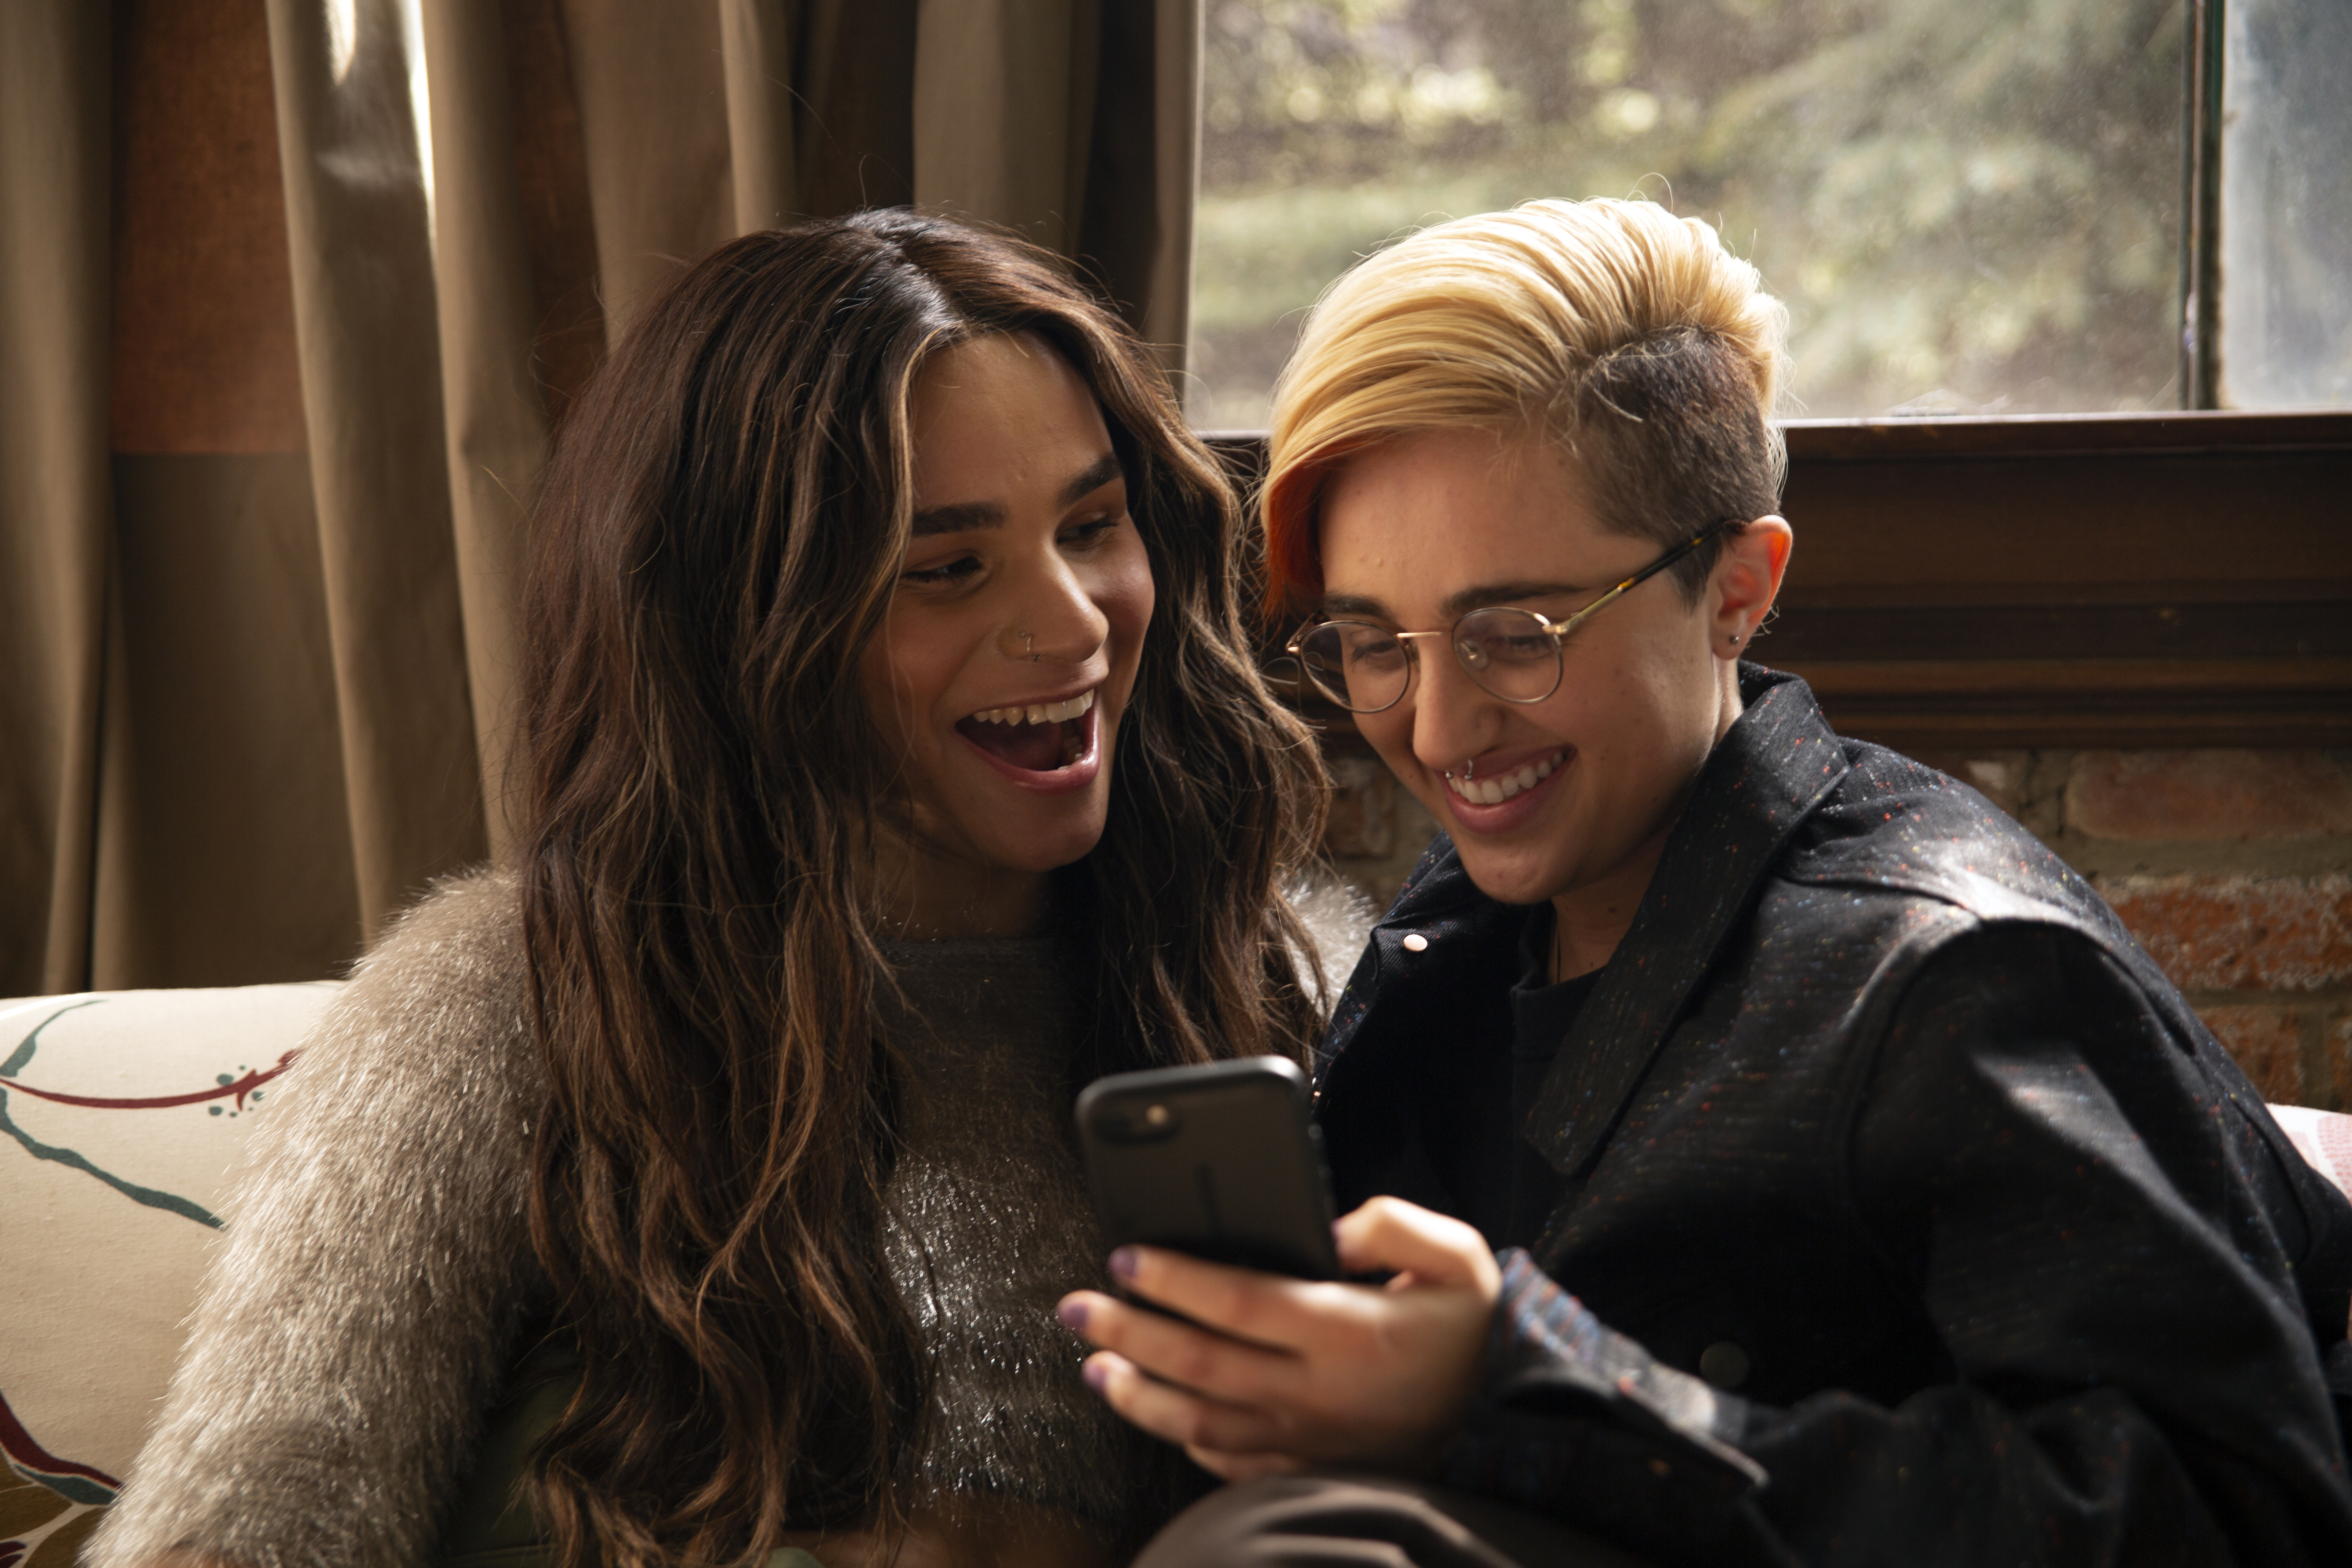 A transfeminine non-binary person and transmasculine gender-nonconforming person looking at a phone and laughing